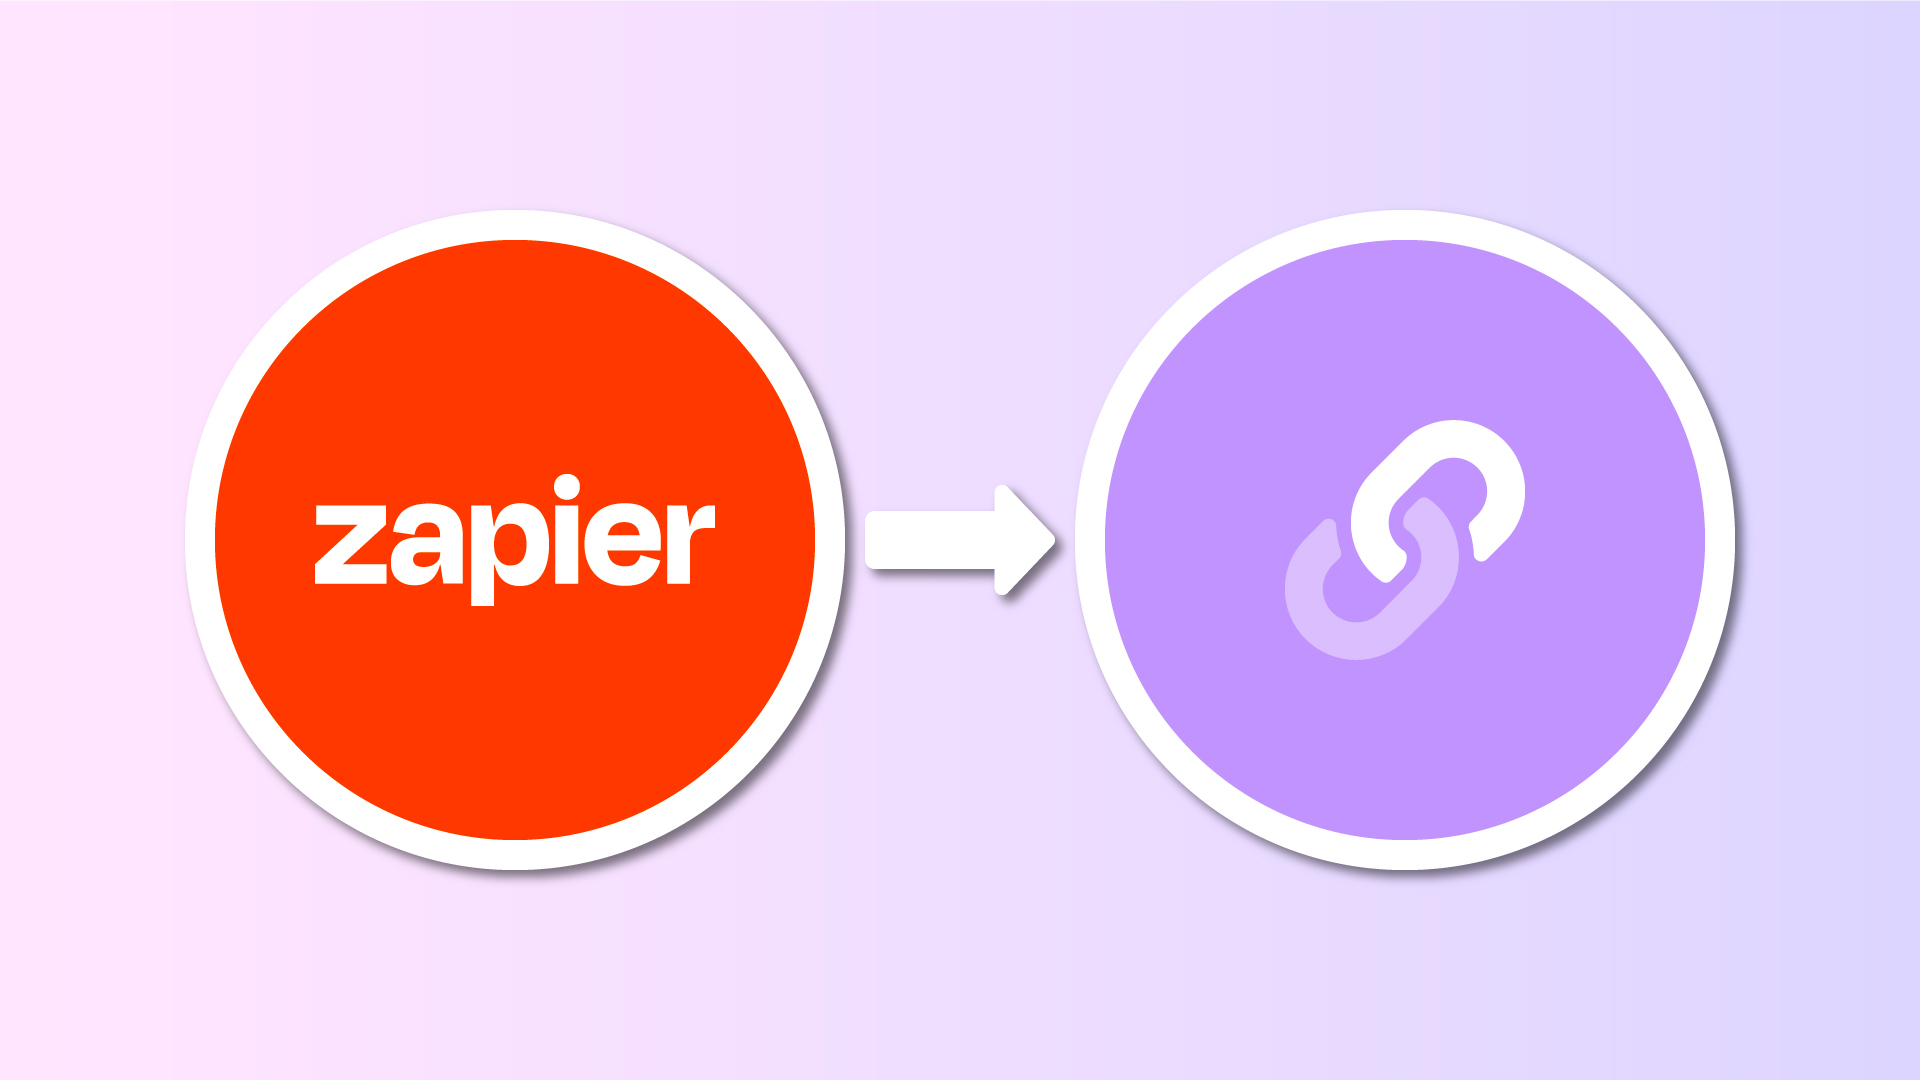 Zapier integration now supports deleting Lnks and associating Lnks with Groups